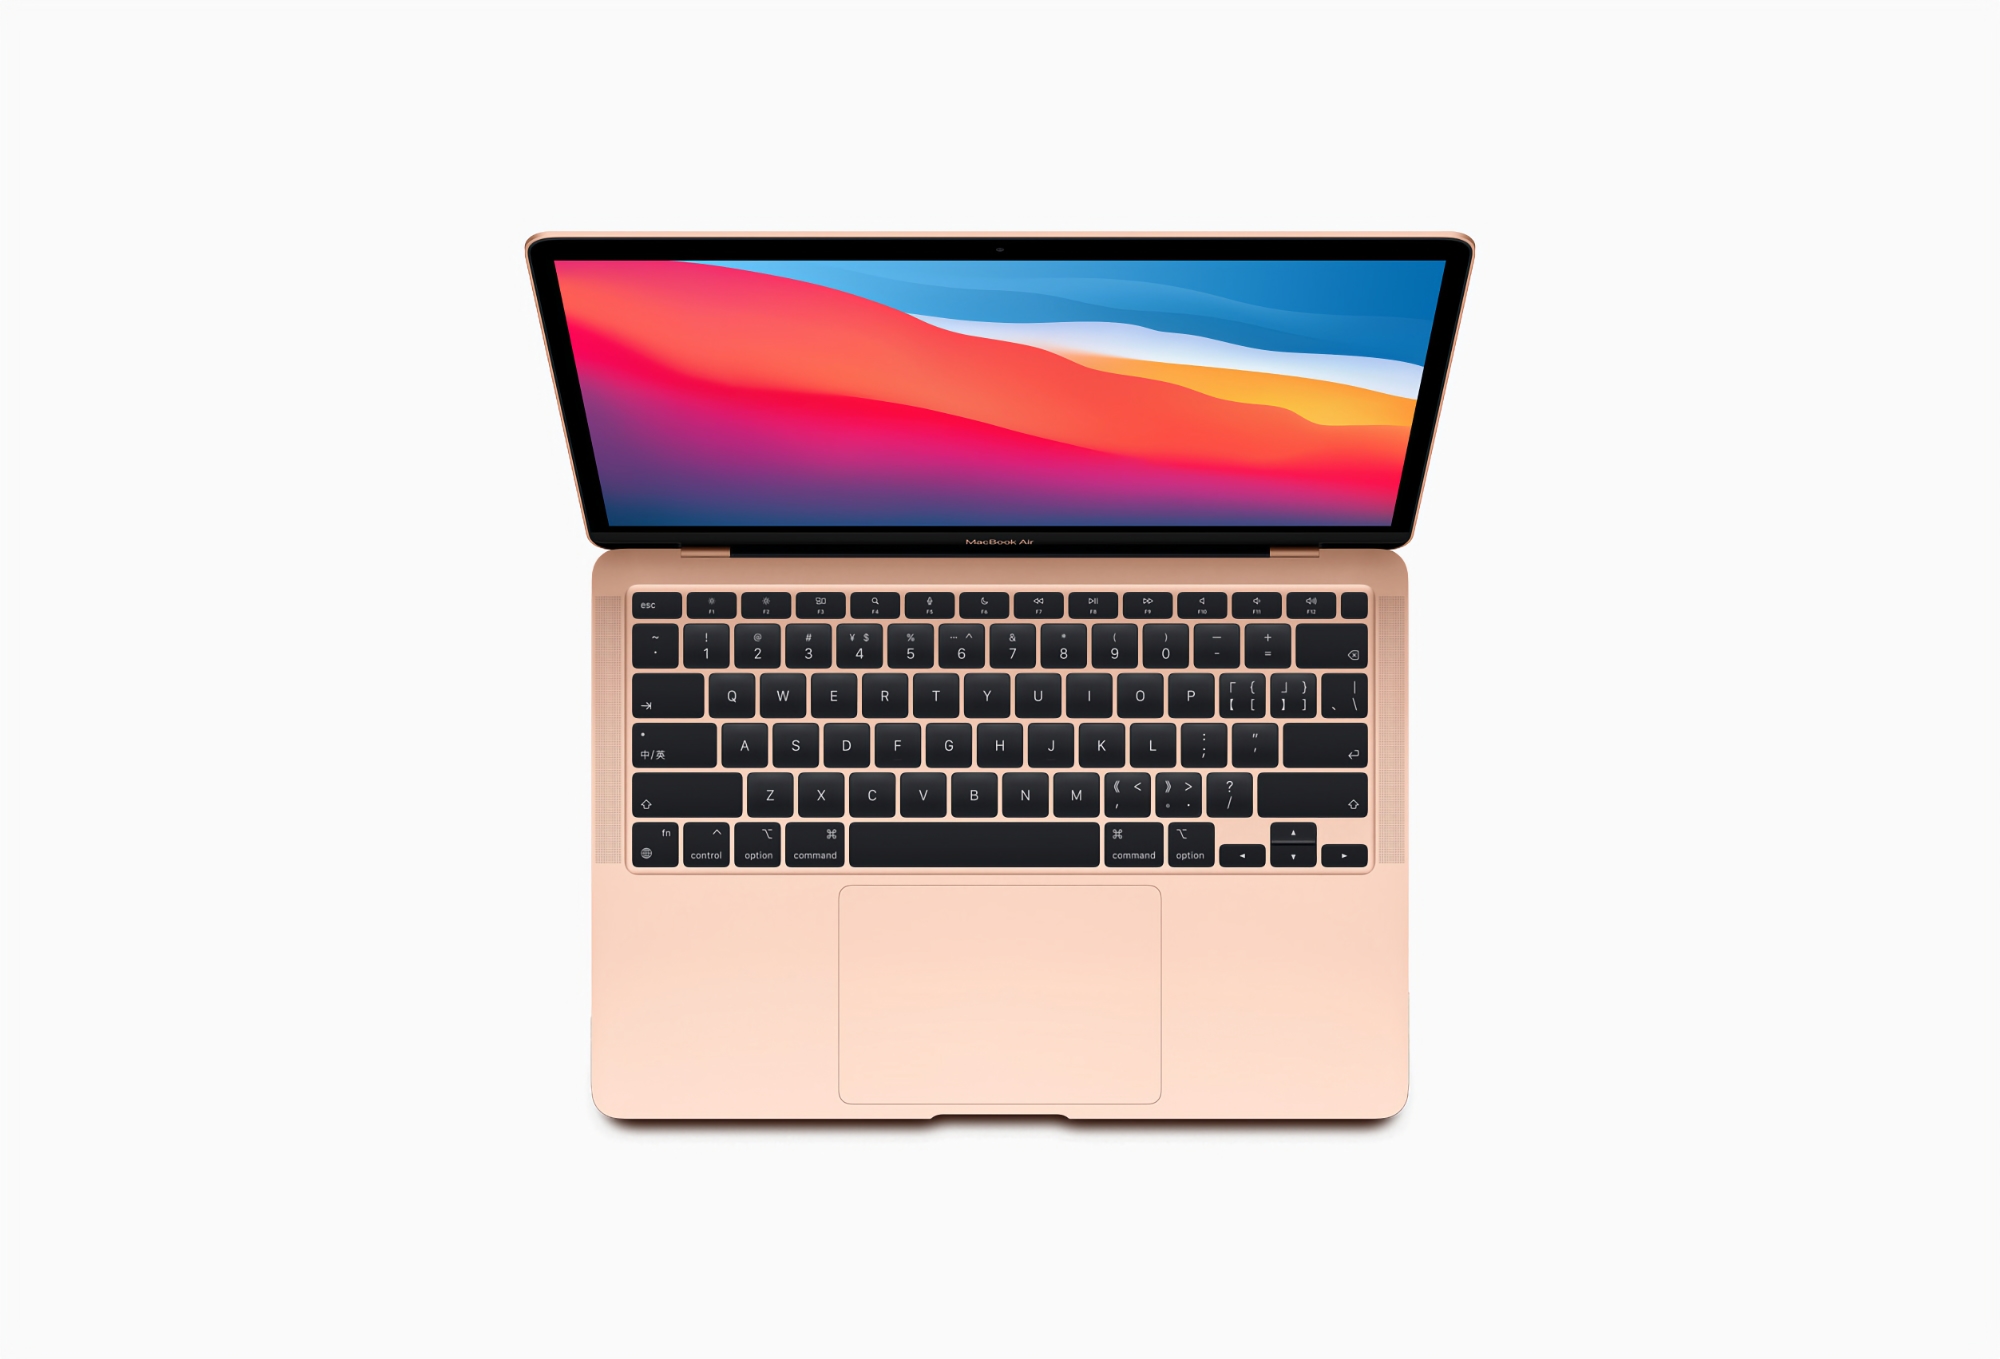 Offer of the day: MacBook Air with M1 chip available at Amazon for $200 off